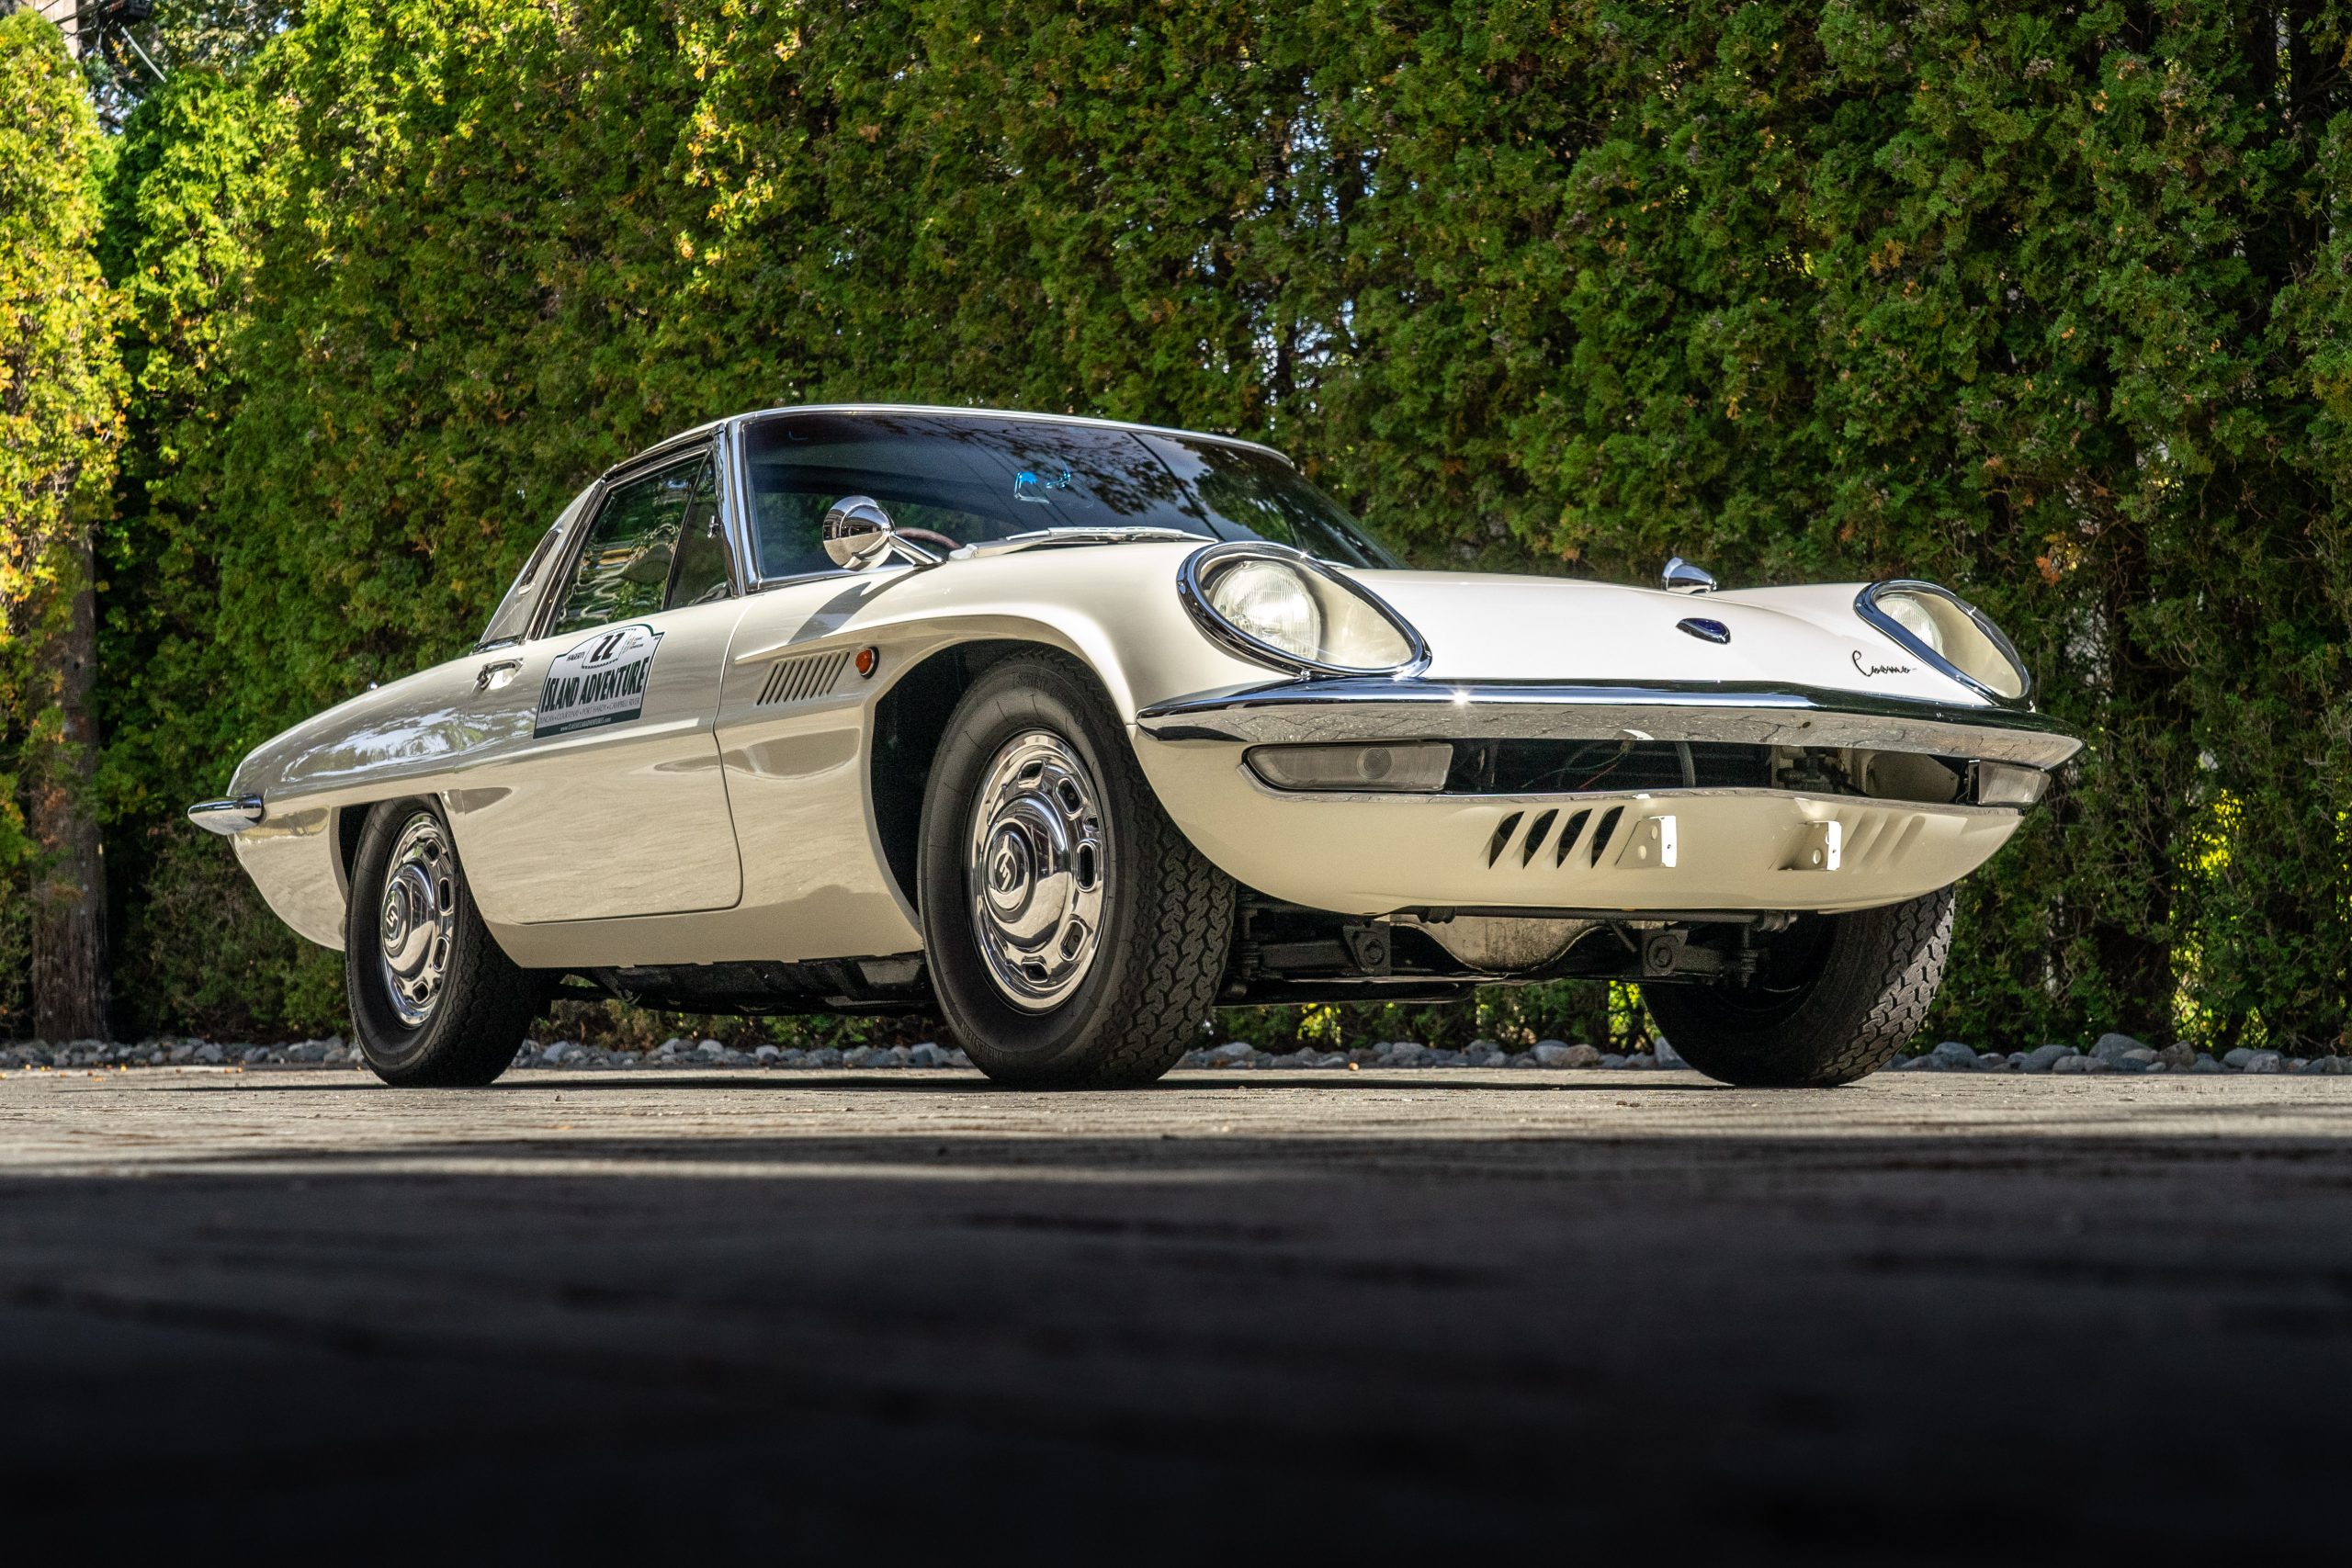 The Mazda Cosmo was a visitor from far, far away